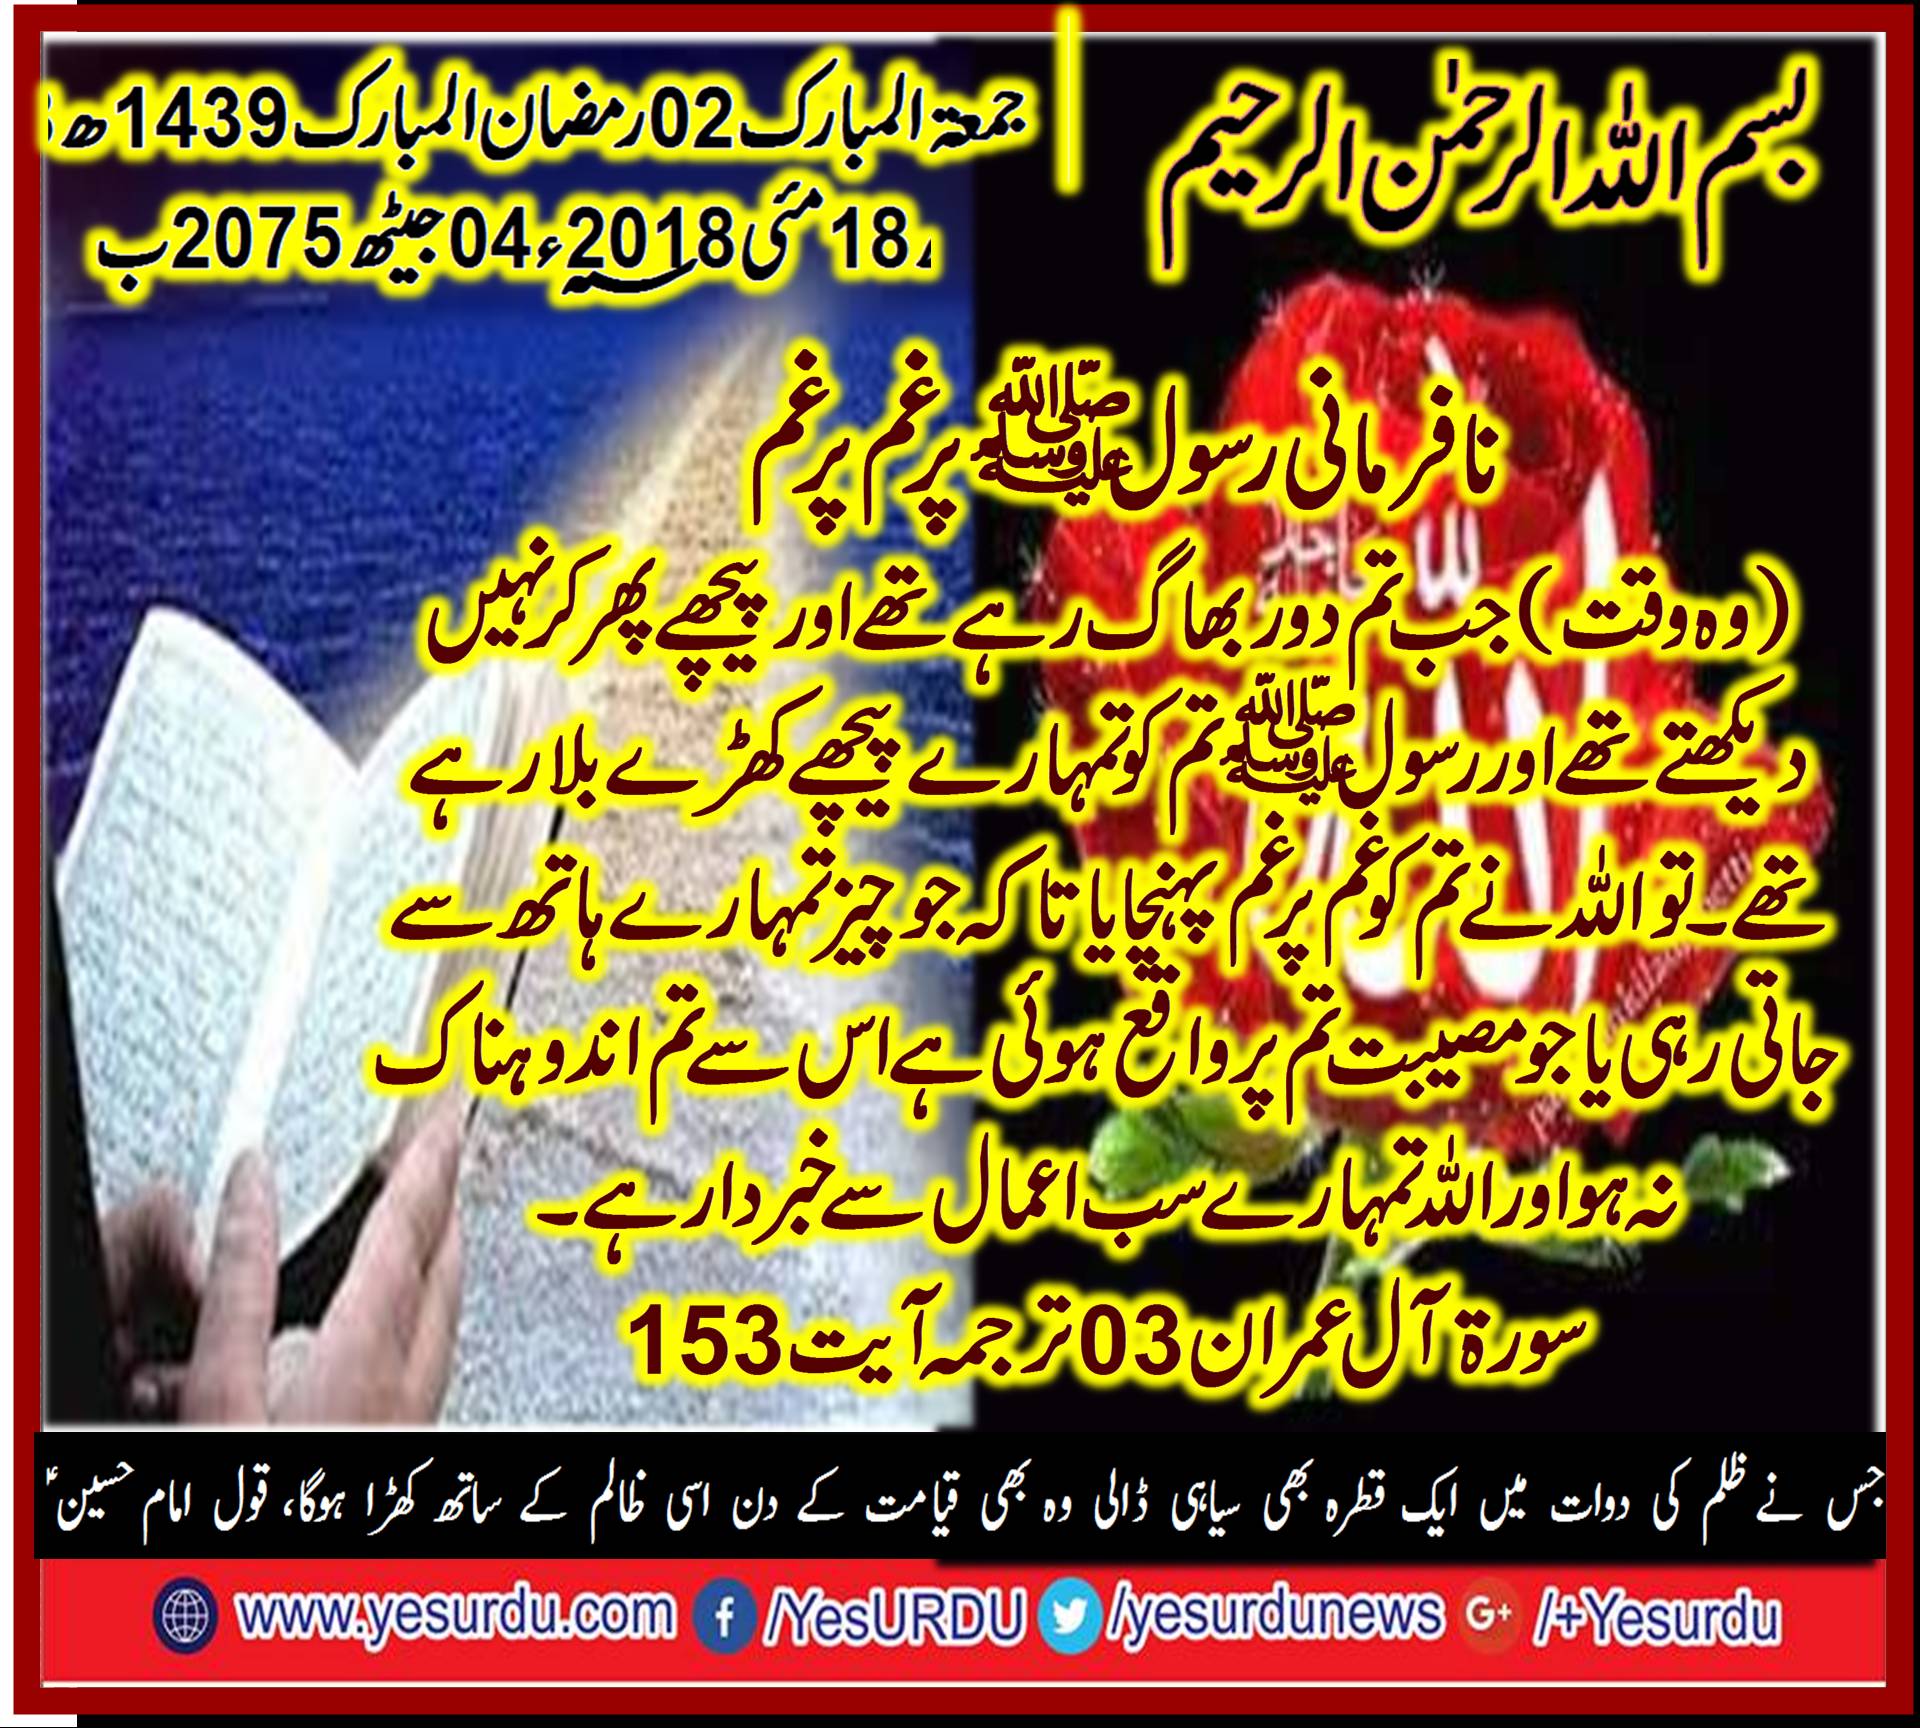 Ayat, e Kareema, Surah, Tehreem, Maryam bint e Imran، Surah Yunas, Allah, ka Fazal, Surah Mulk, 67, Ayat, No. 3, to, 4, Allah's, creature, Surah, Aal e Imran, Ayat, No, 103, Allah, gives, love, to, hearts, Surah Aal e Imran, Ayat, No 154, Allah's, will, and, your, end, of, time, takes, you, to, the, place, of, your, end, Ayat, No 155, in, the, War of Ohad, Shatan, disappointed, companions, of, Hazrat, Muhammad, S.A.W, Ayat No 156, when, you, left, your,house, for, jihad, Allah, keeps, you, under, the, shelter, Ayat, No 153: On, Disobedience, of, Hazrat Muhammad S.A.W.W, Muslims, faced, grief